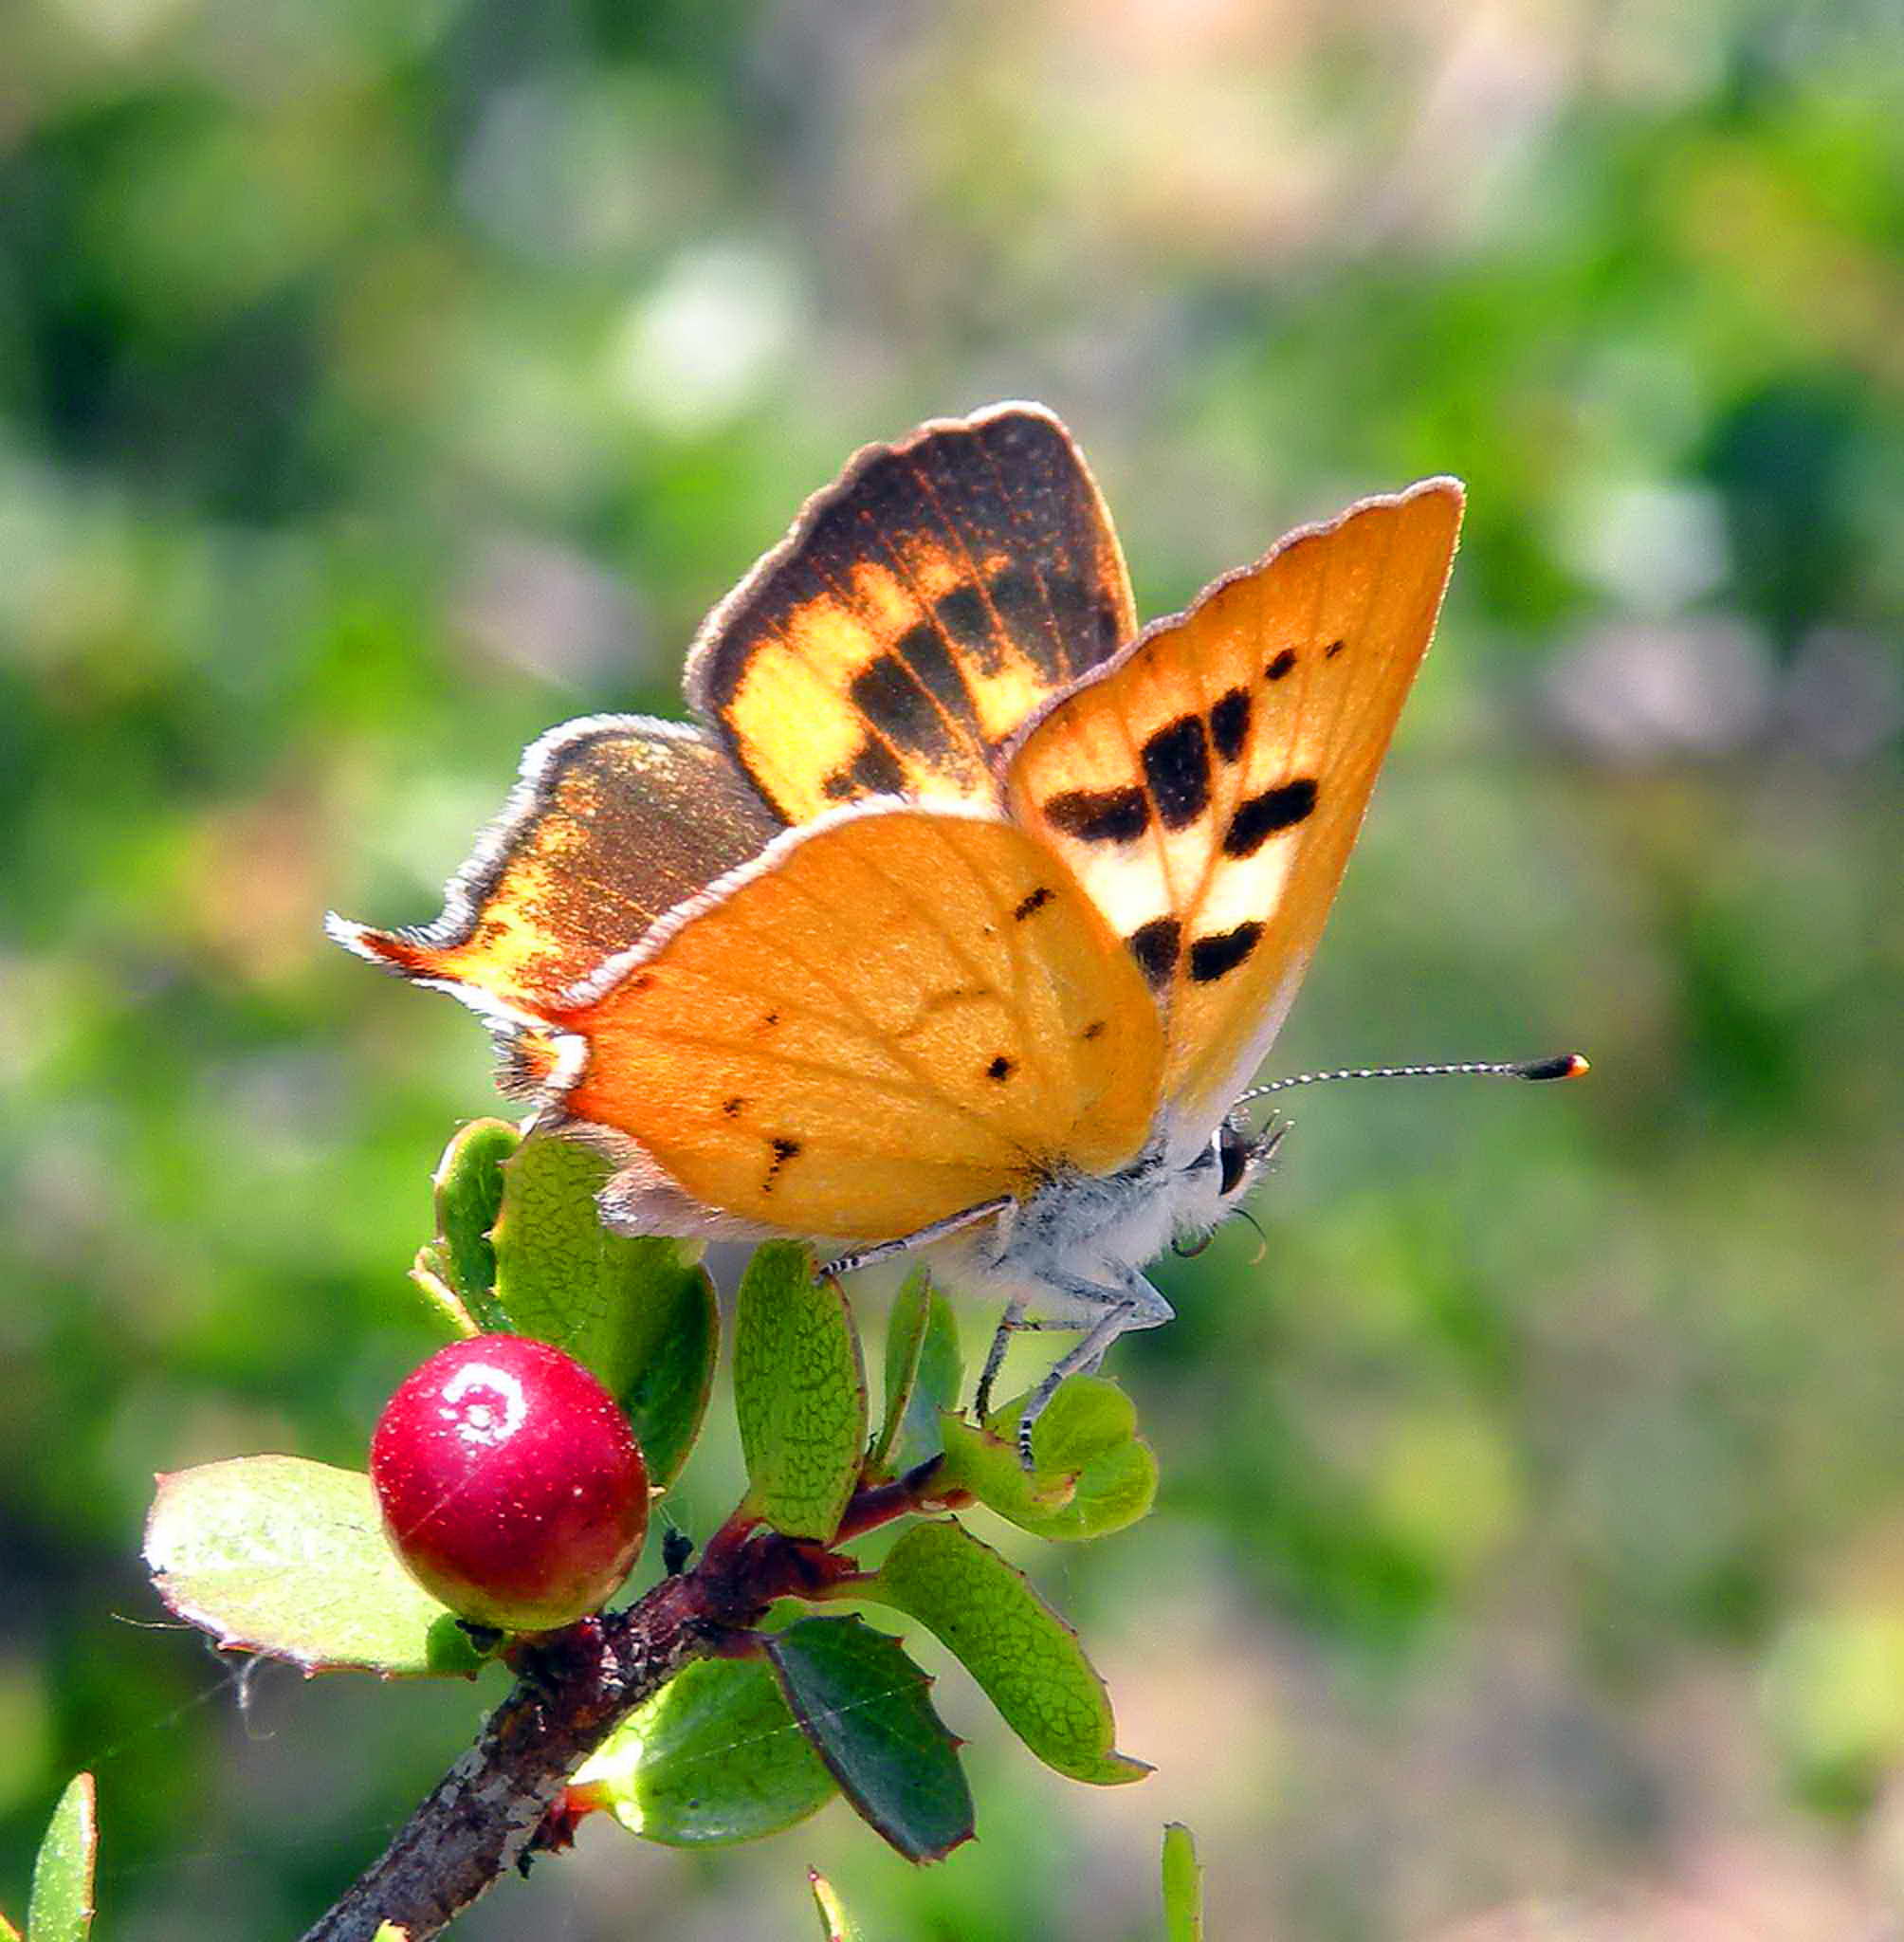 Free Picture Hermes Copper Butterfly Insect Lycaena Hermes Images, Photos, Reviews